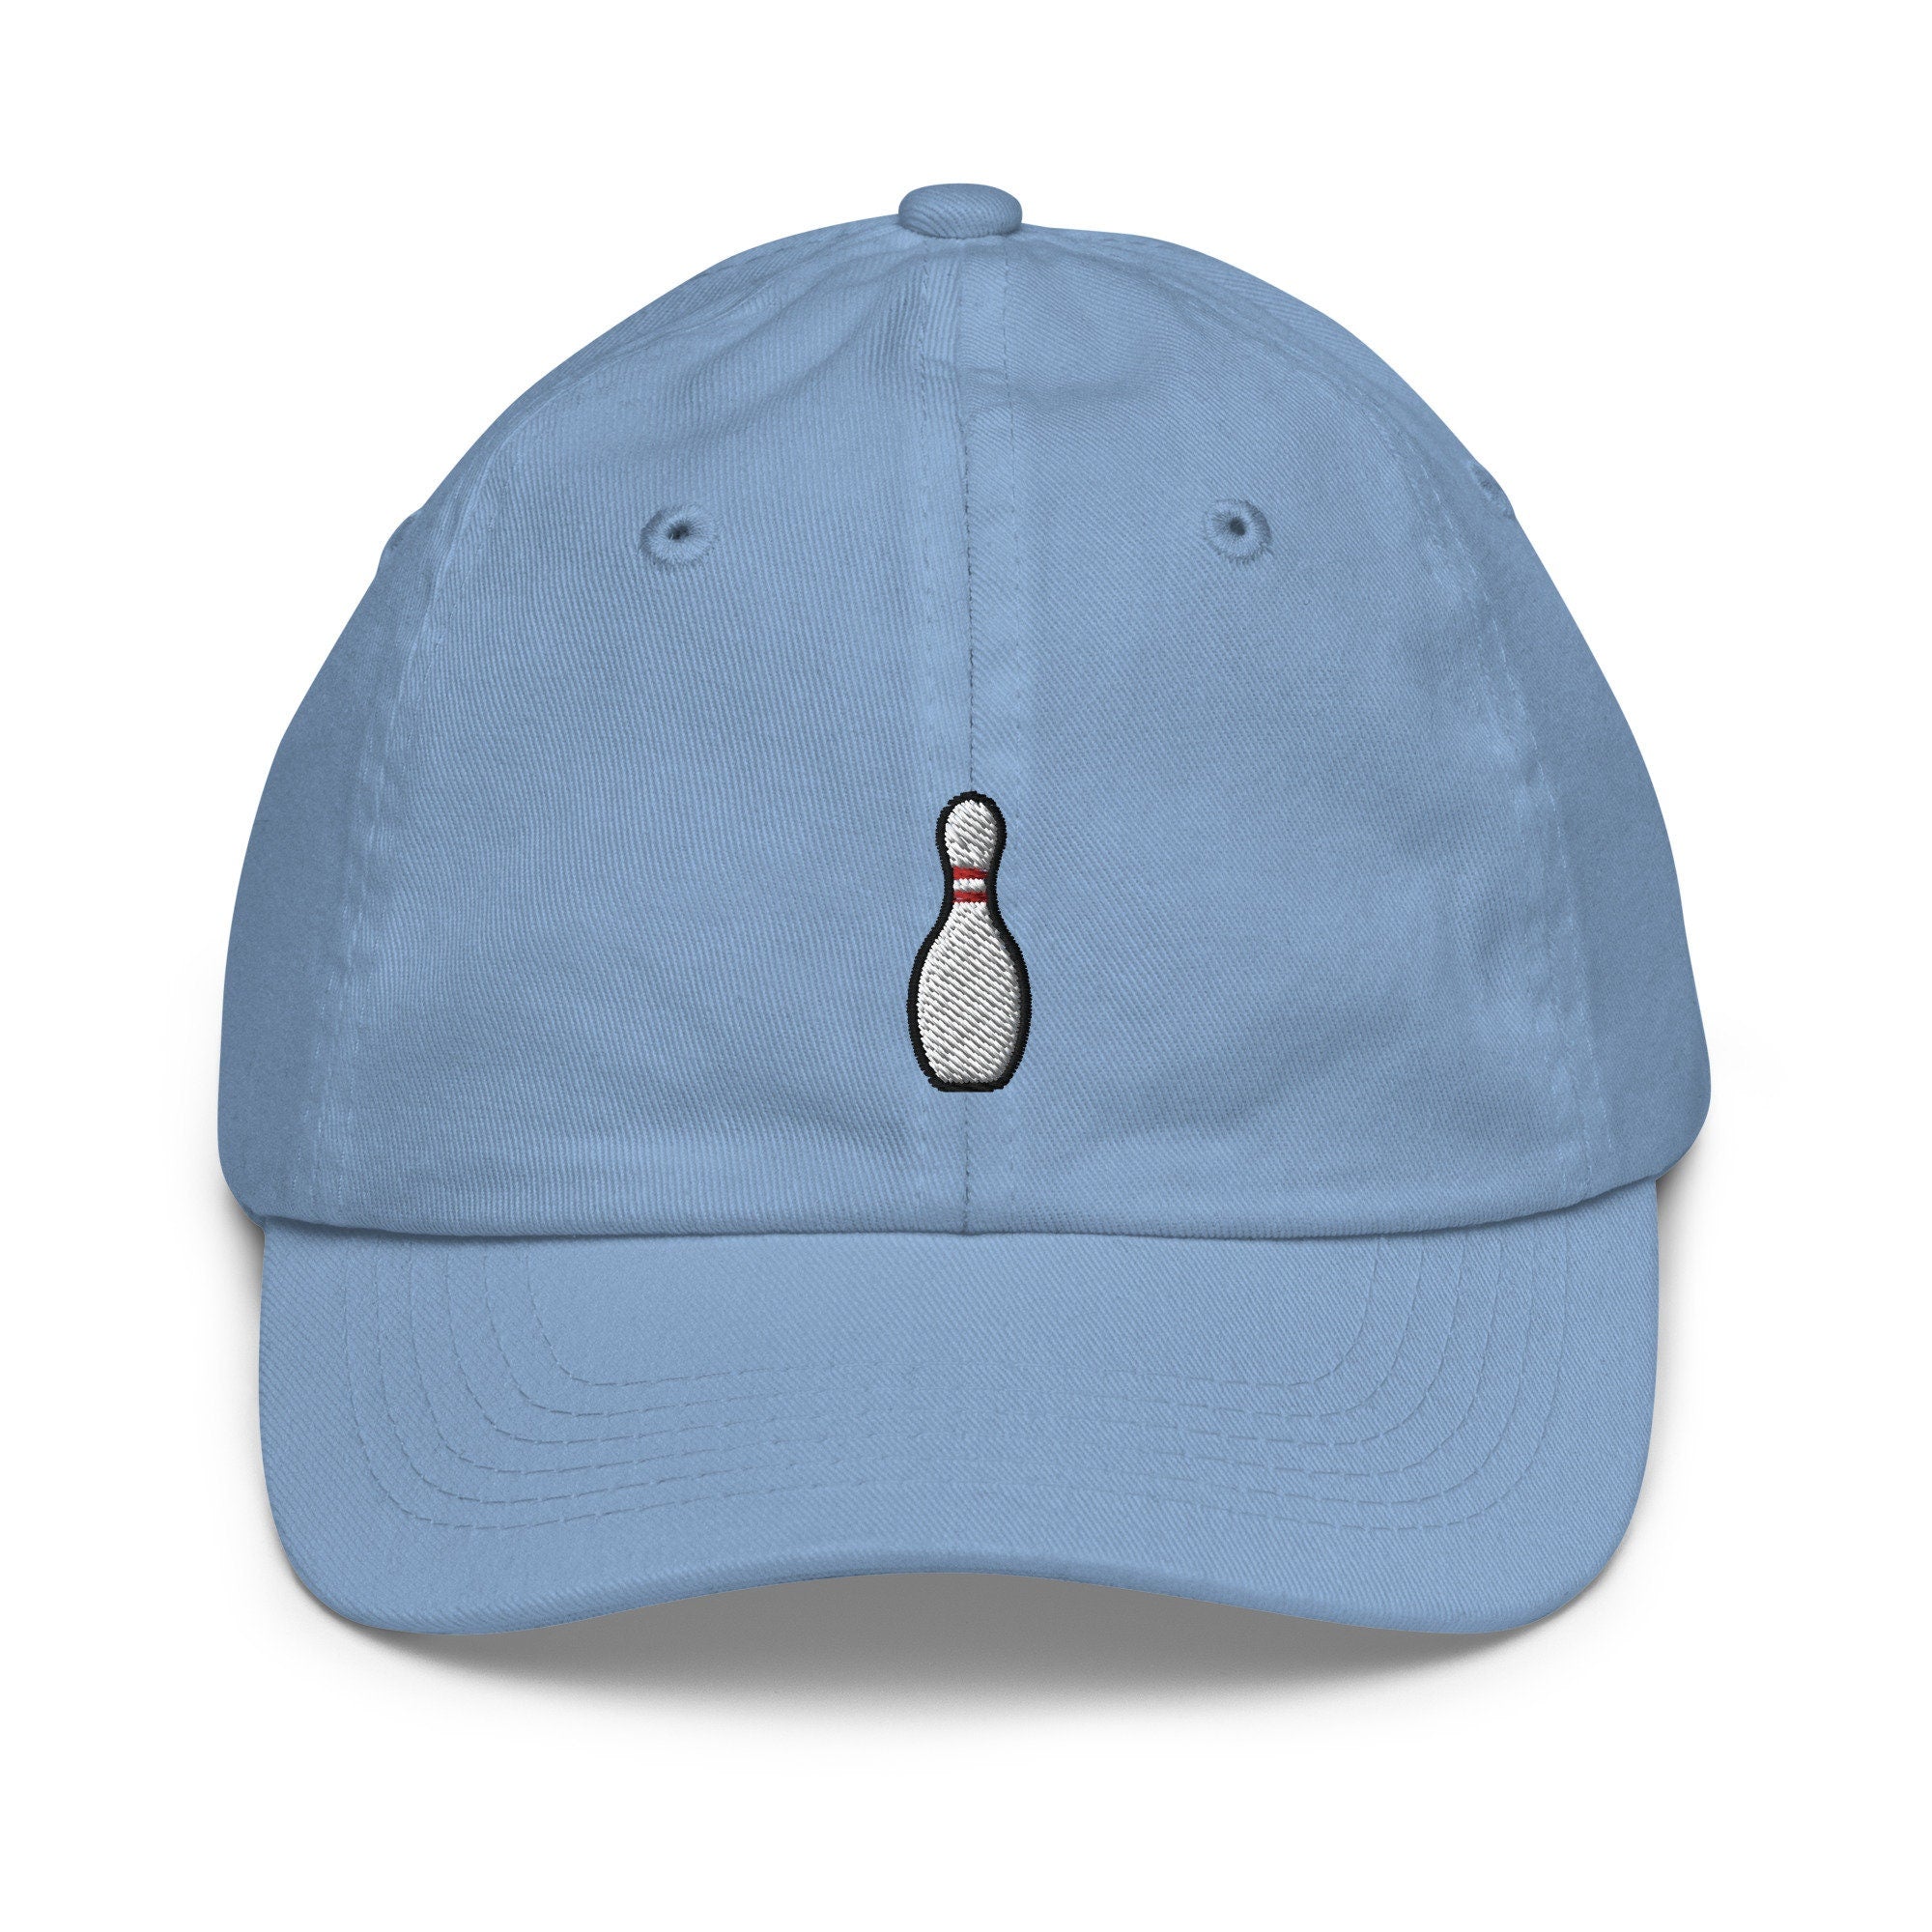 Kids Bowling Pin Youth Baseball Cap, Embroidered Kids Hat, Childrens Hat Gift - Multiple Colors